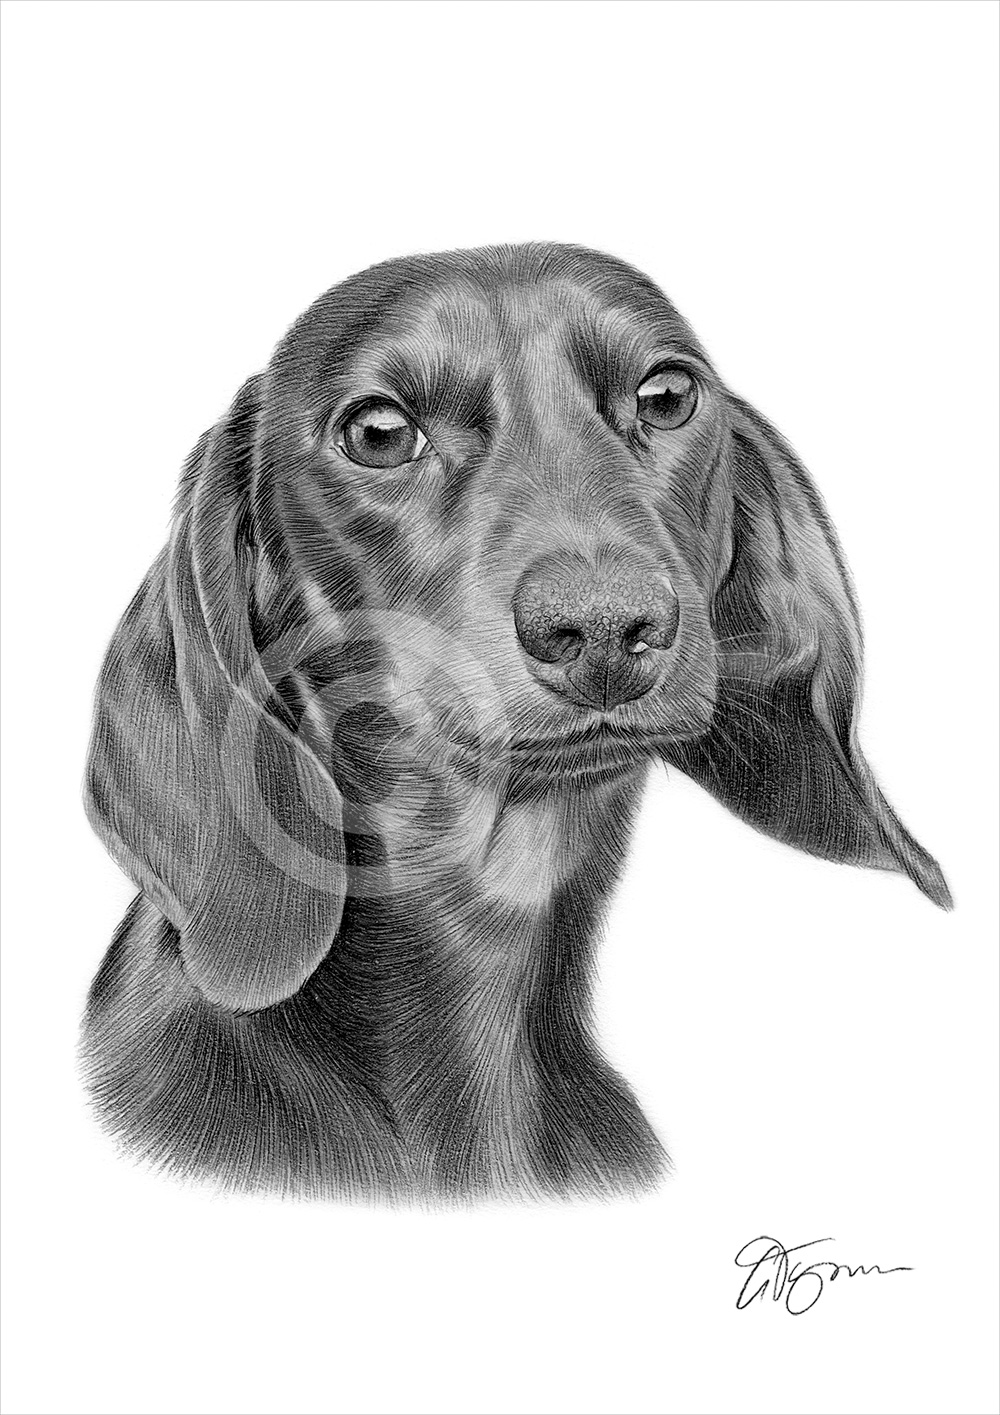 Pencil drawing of a young Dachshund by artist Gary Tymon